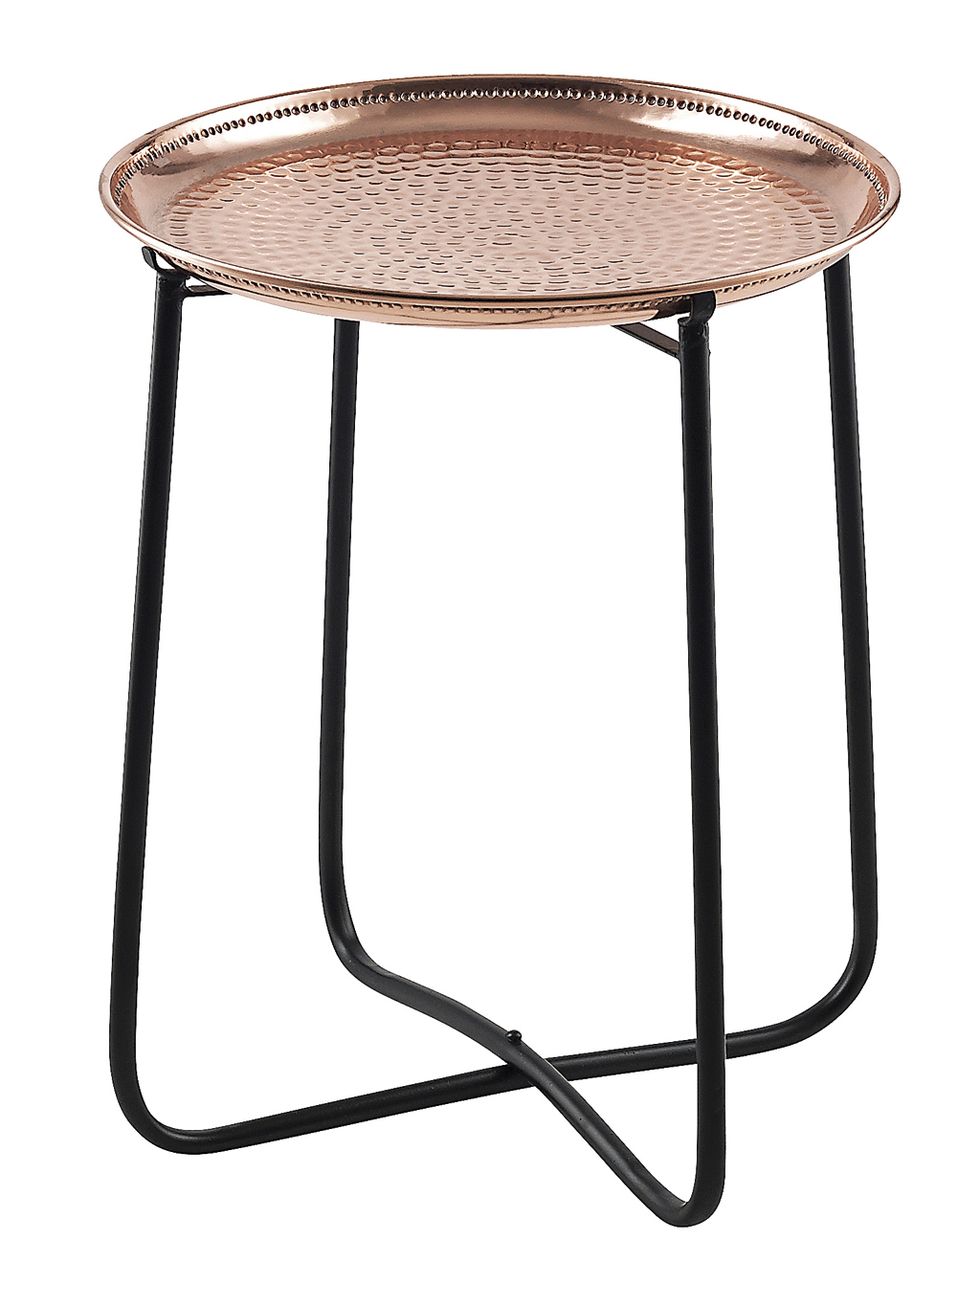 Table, End table, Furniture, Outdoor table, Coffee table, Bar stool, Metal, 